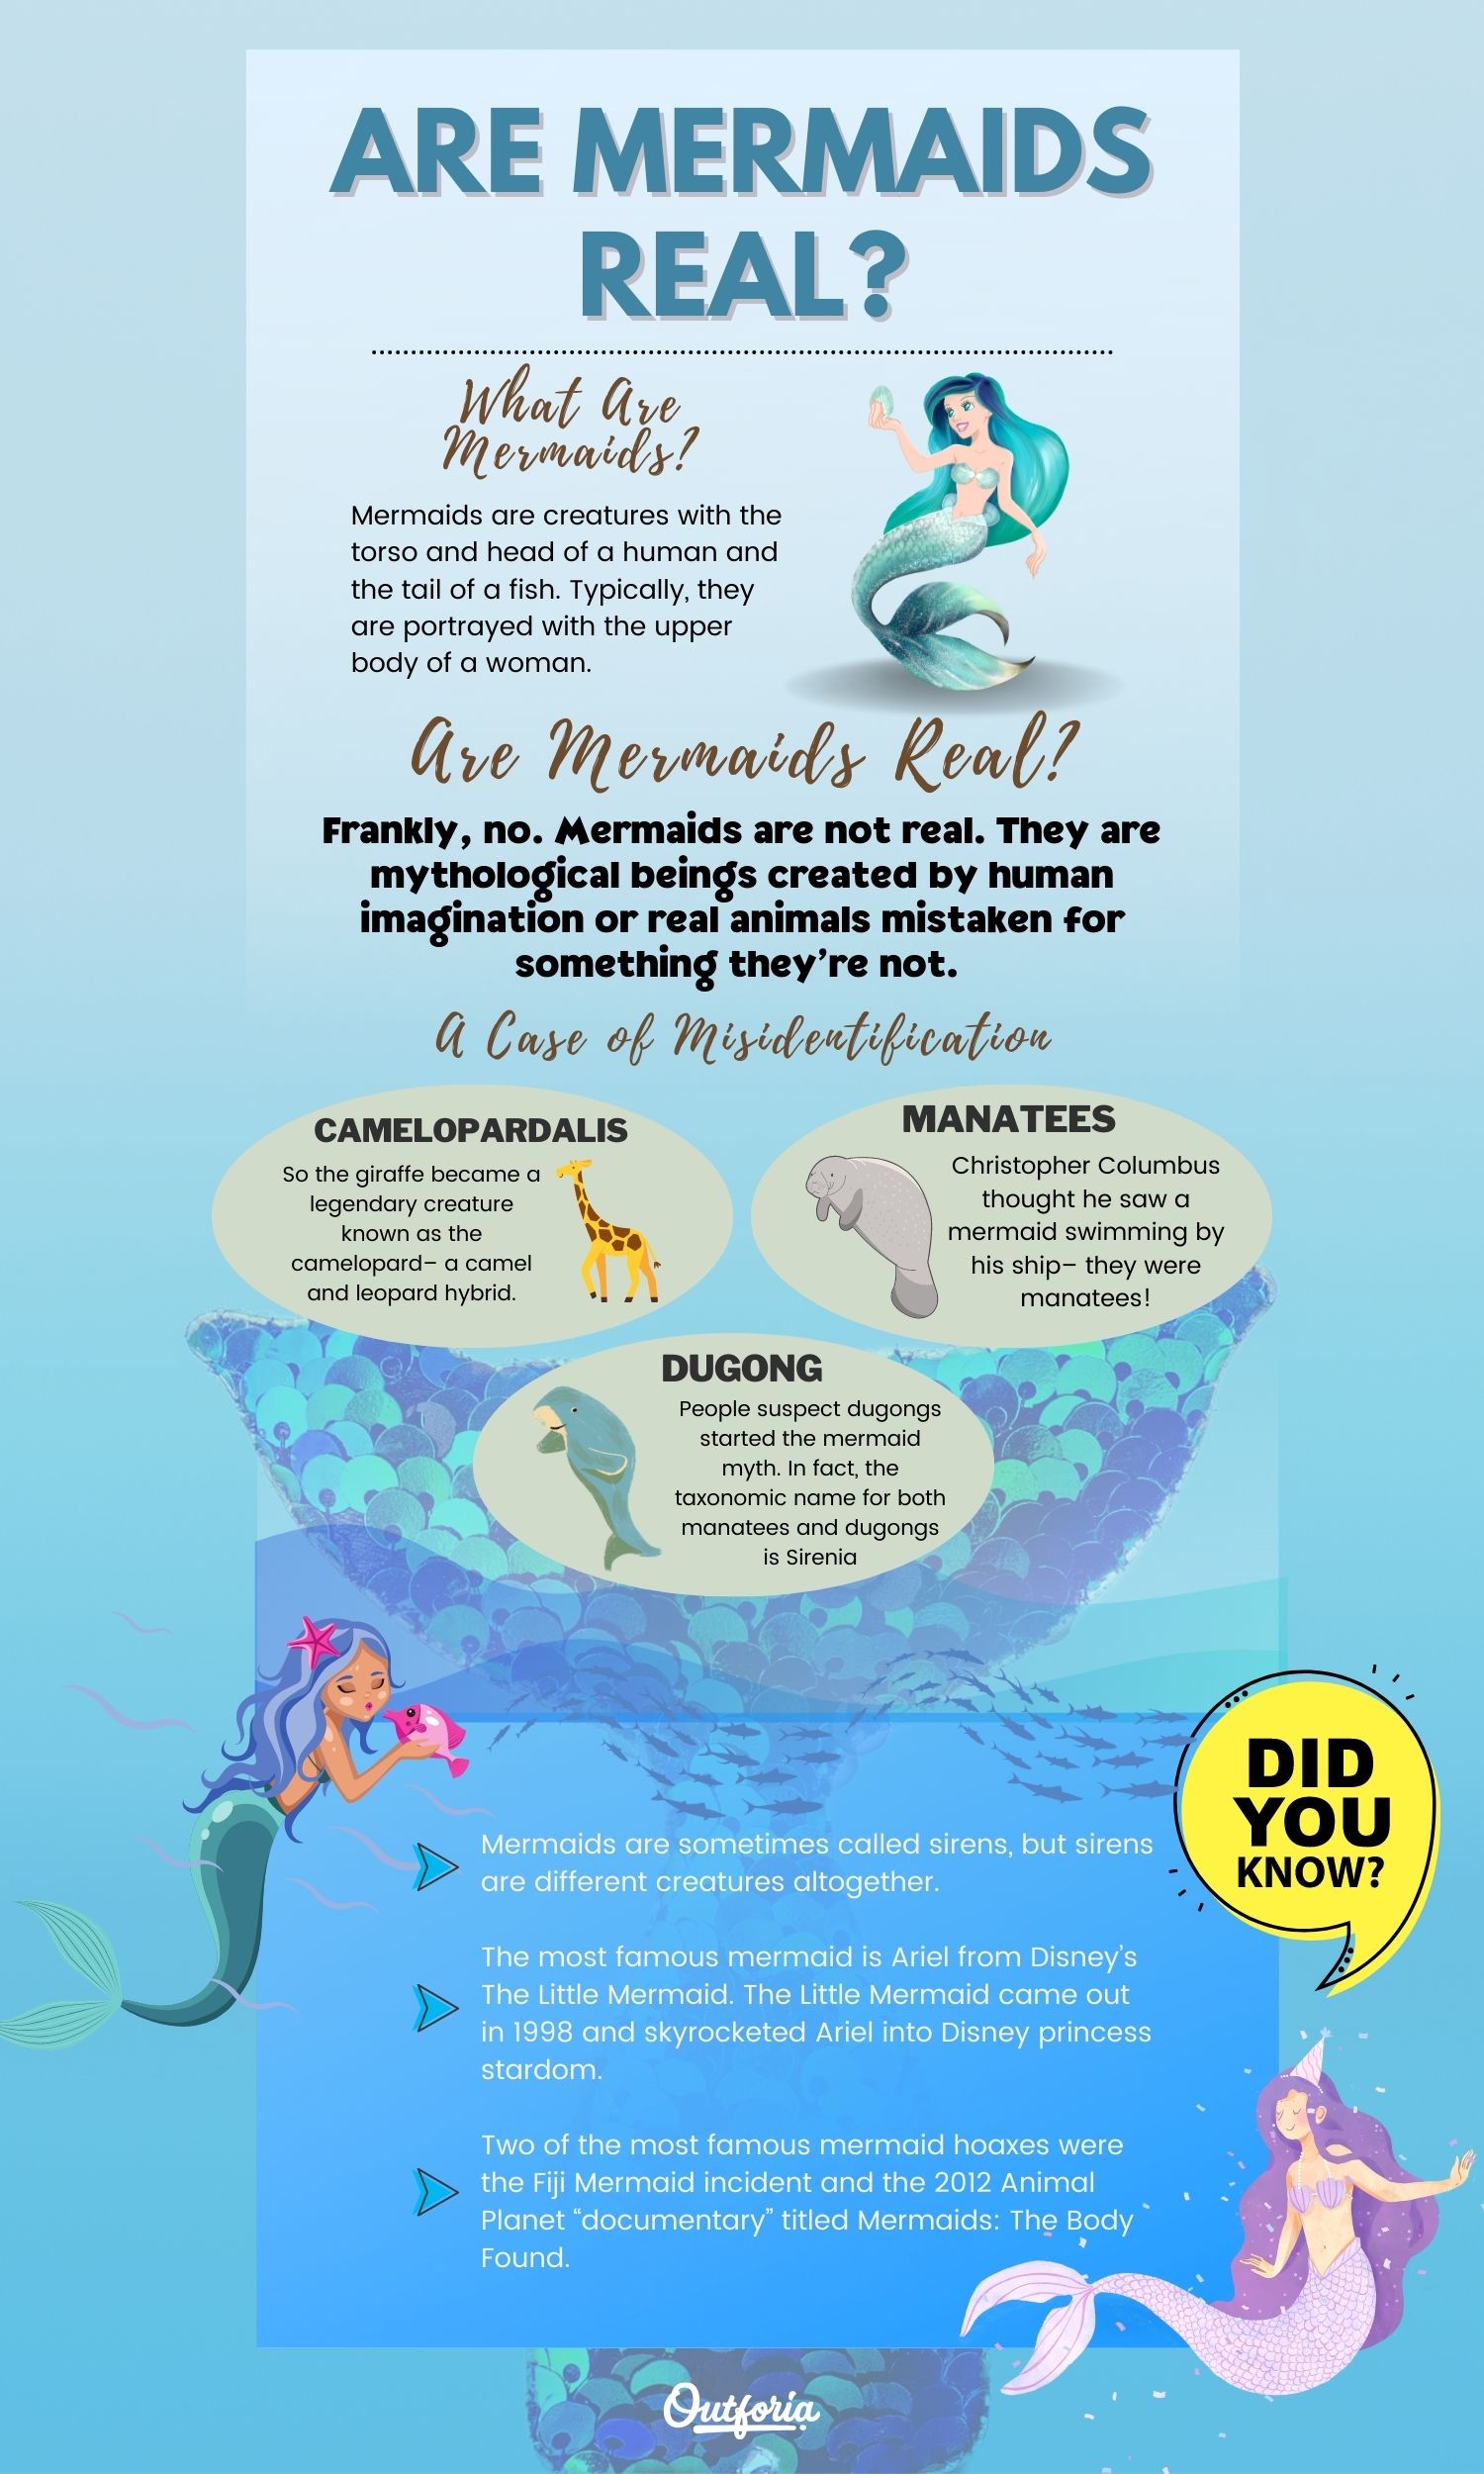 Chart of are mermaids real complete with facts, pictures, and FAQs